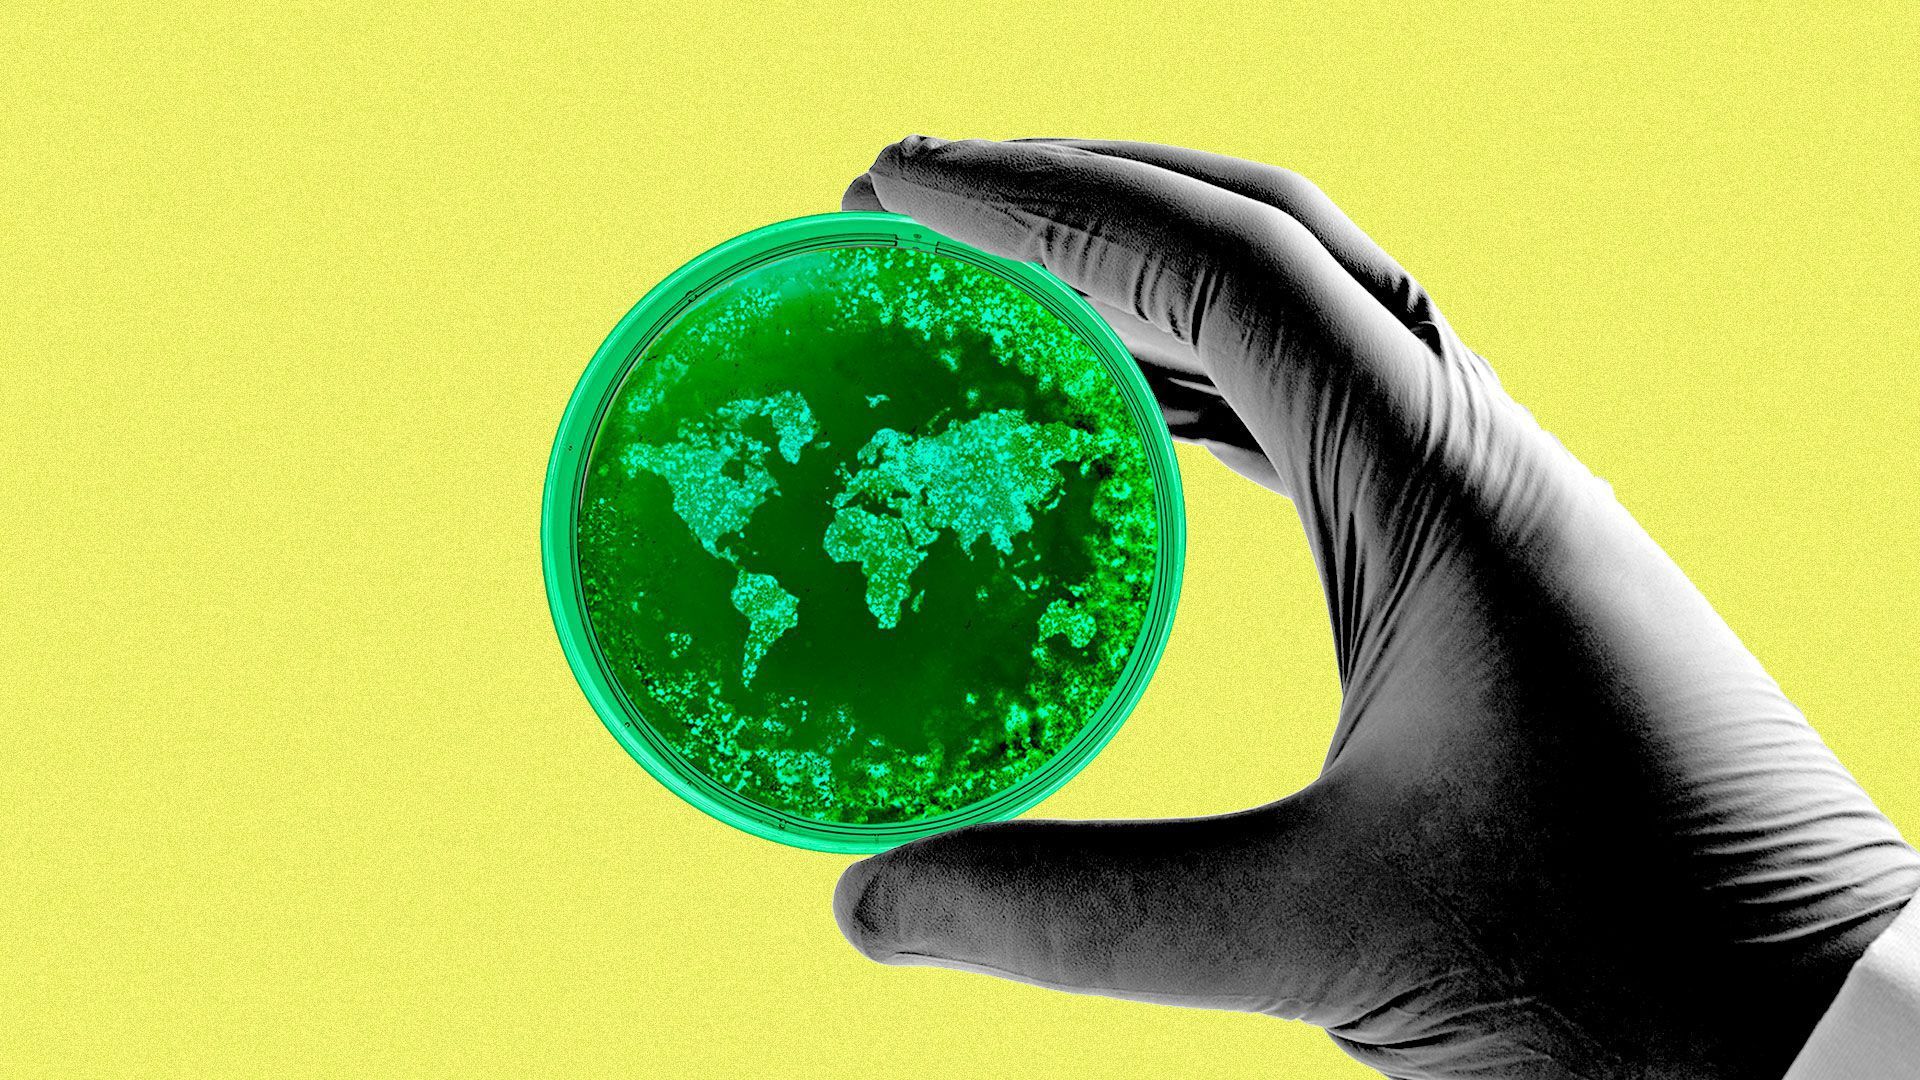 Hand holding green image of world in a petri dish.